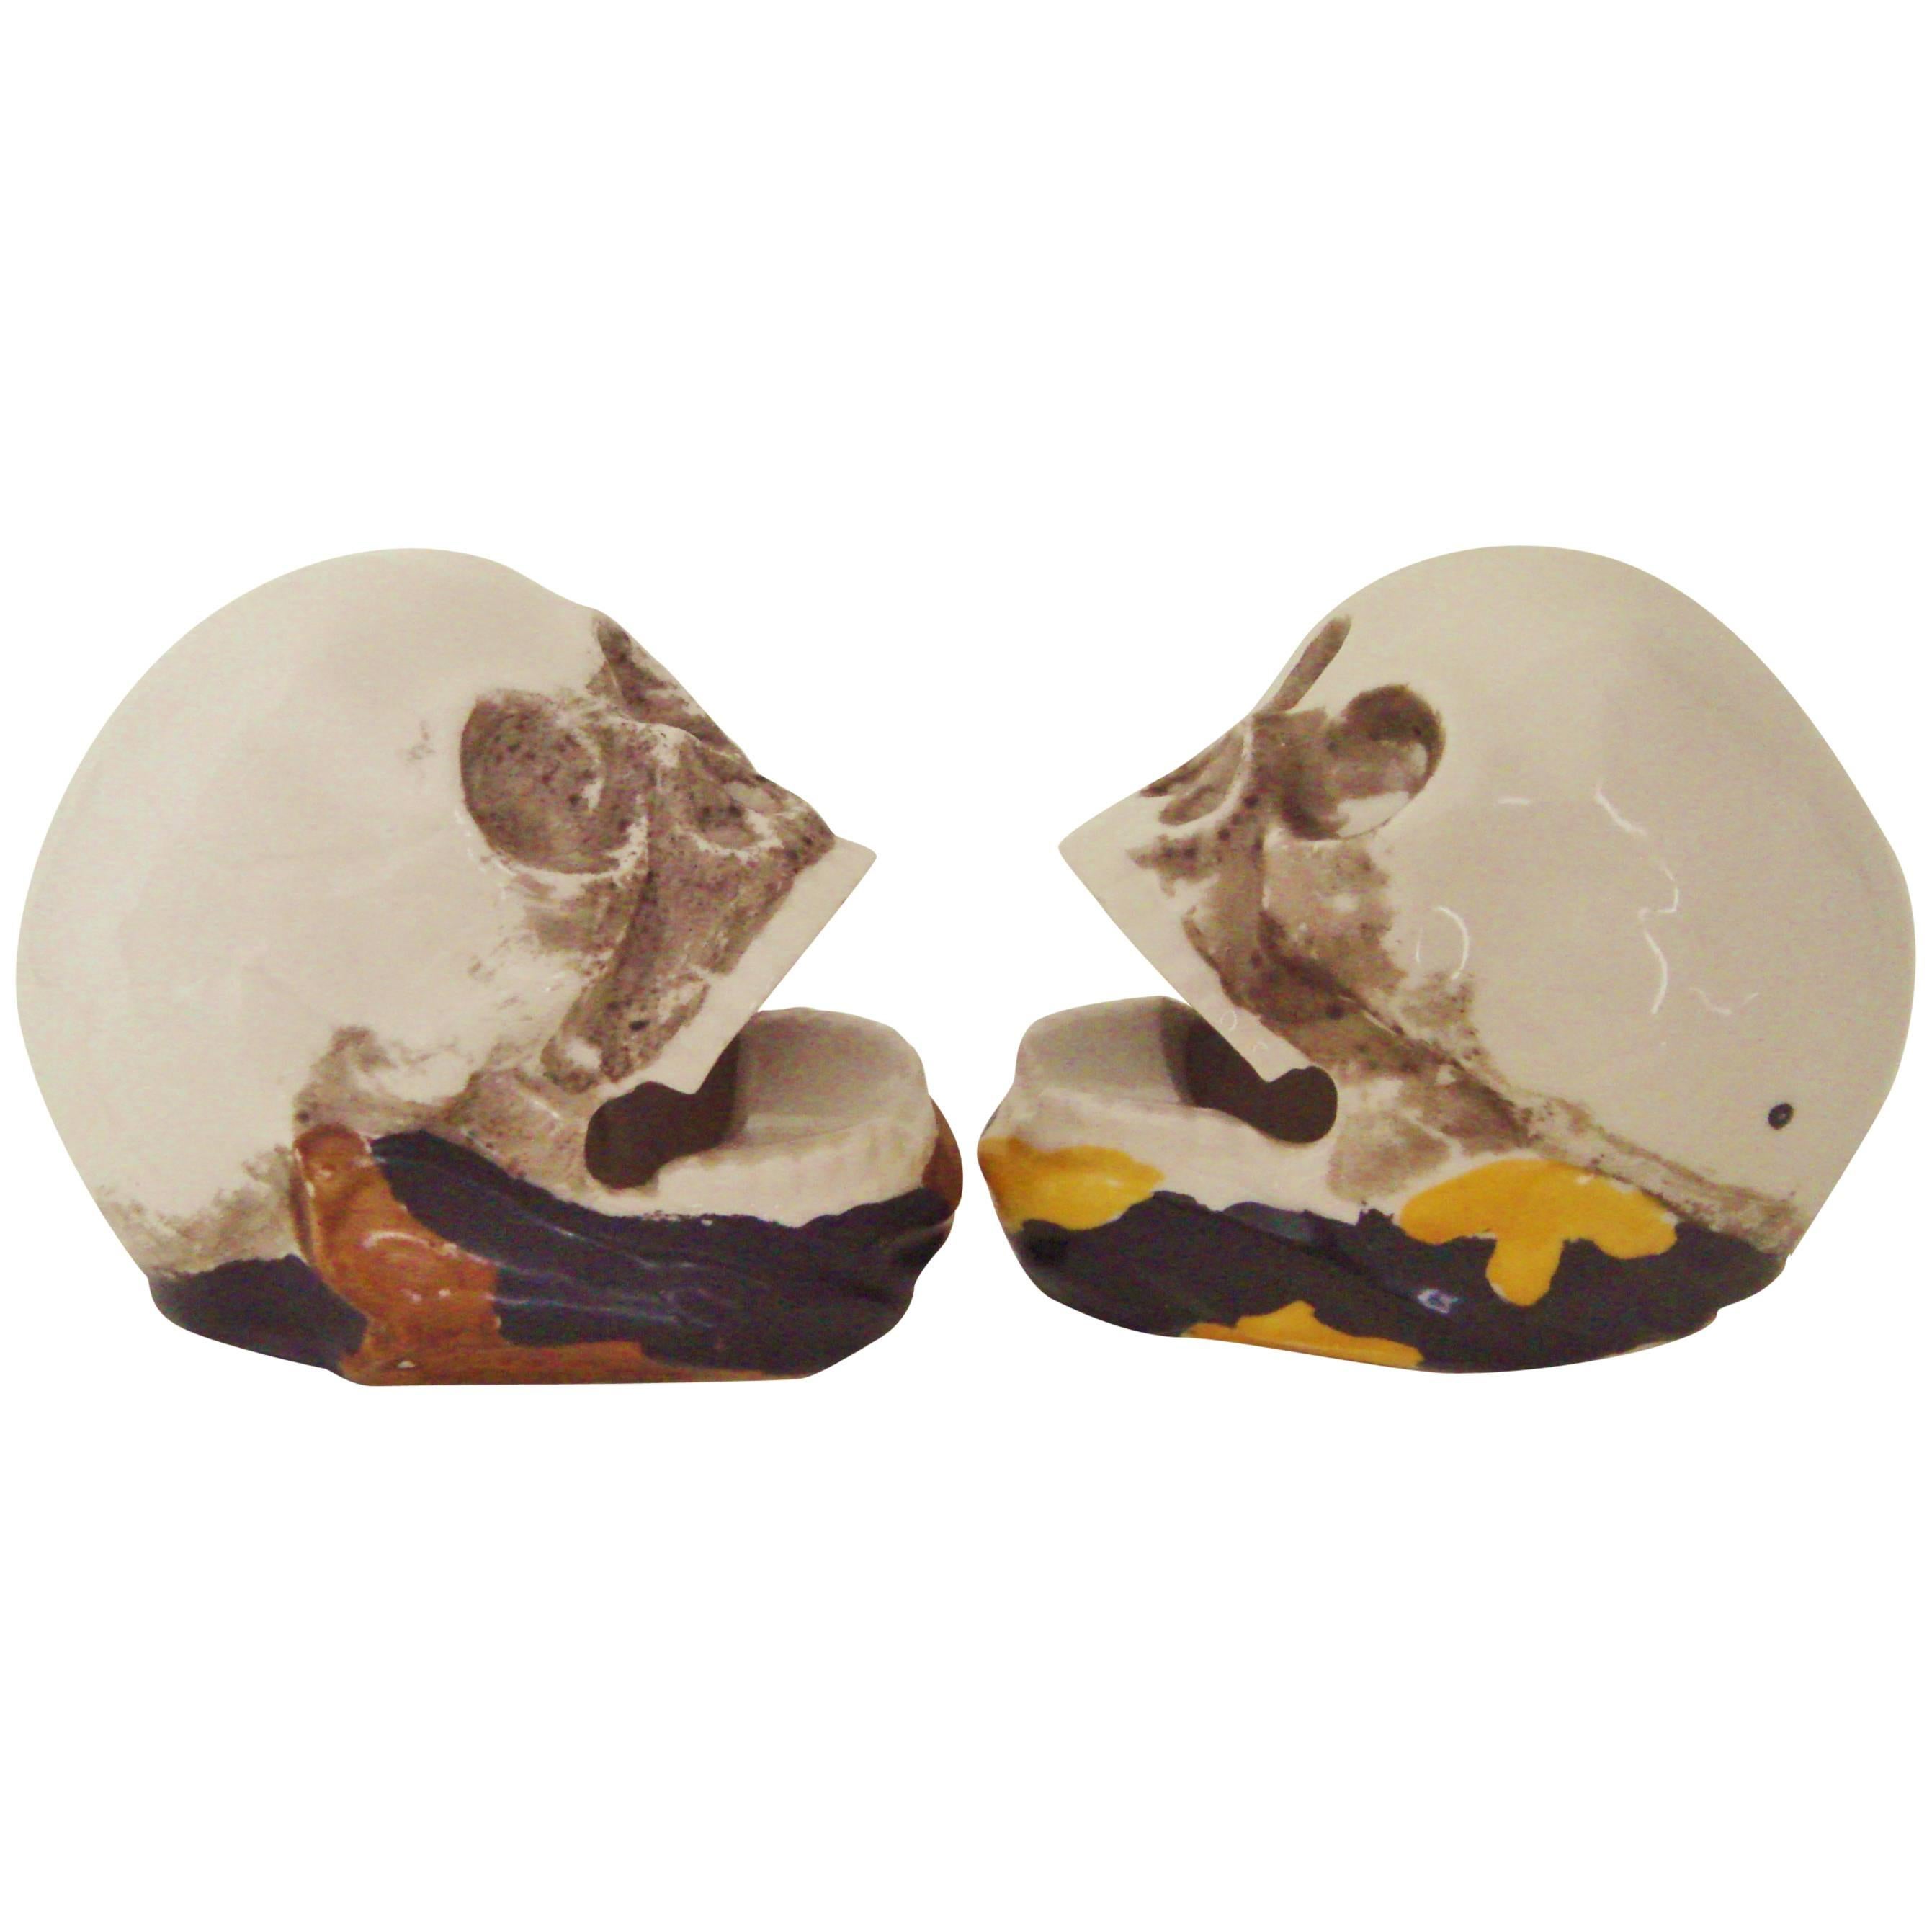 Pair of Japanese Mid-Century Skull Ashtrays by Shafford Hand Decorated China.